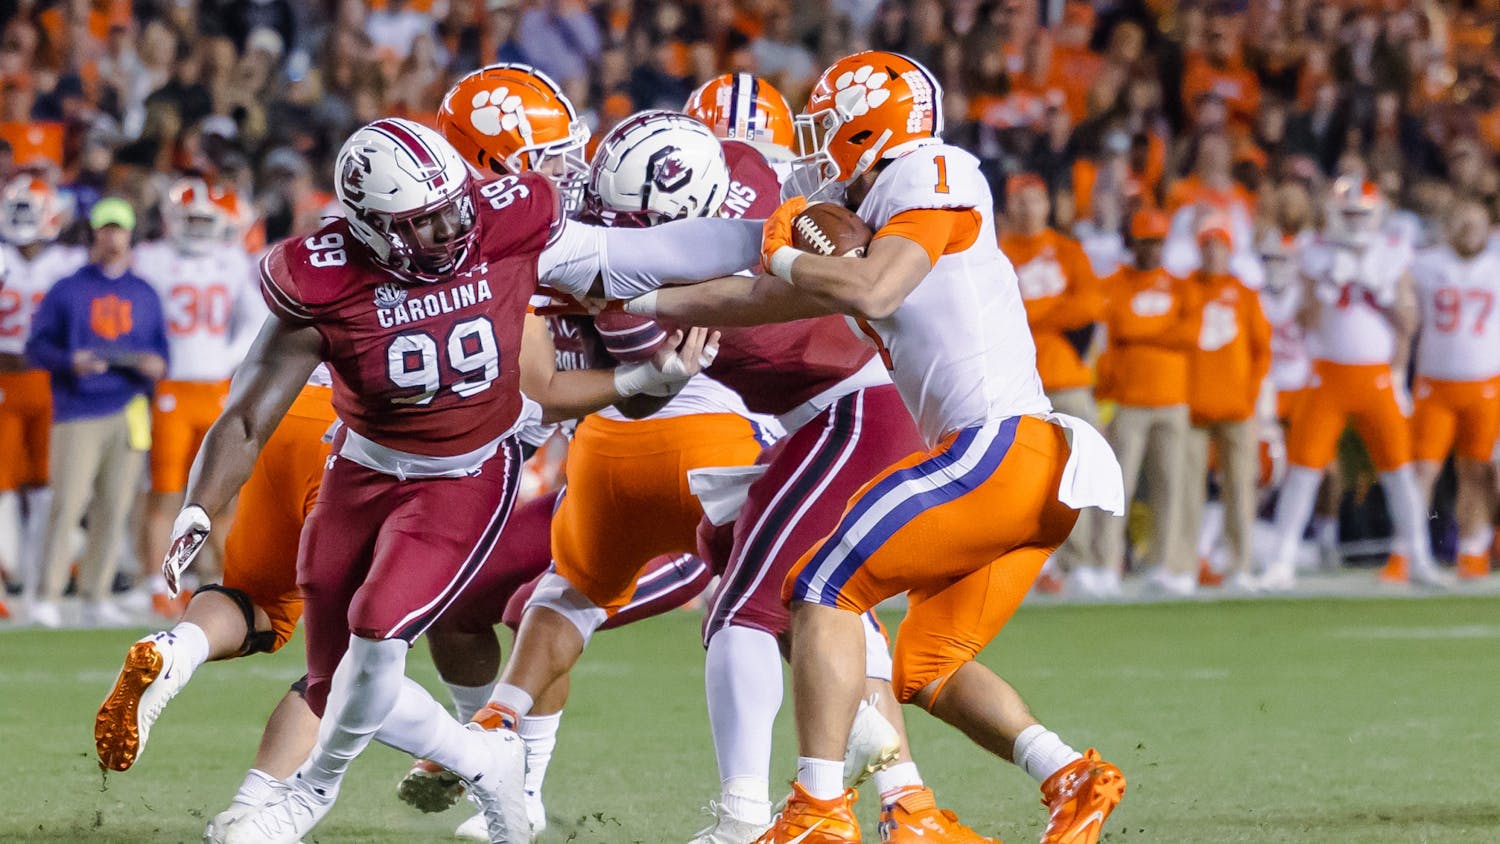 Defensive Lineman Jabari Ellis attempts to grab the ball against the Clemson Tigers running back Will Shipley. The Tigers won 30-0 against the Gamecocks.